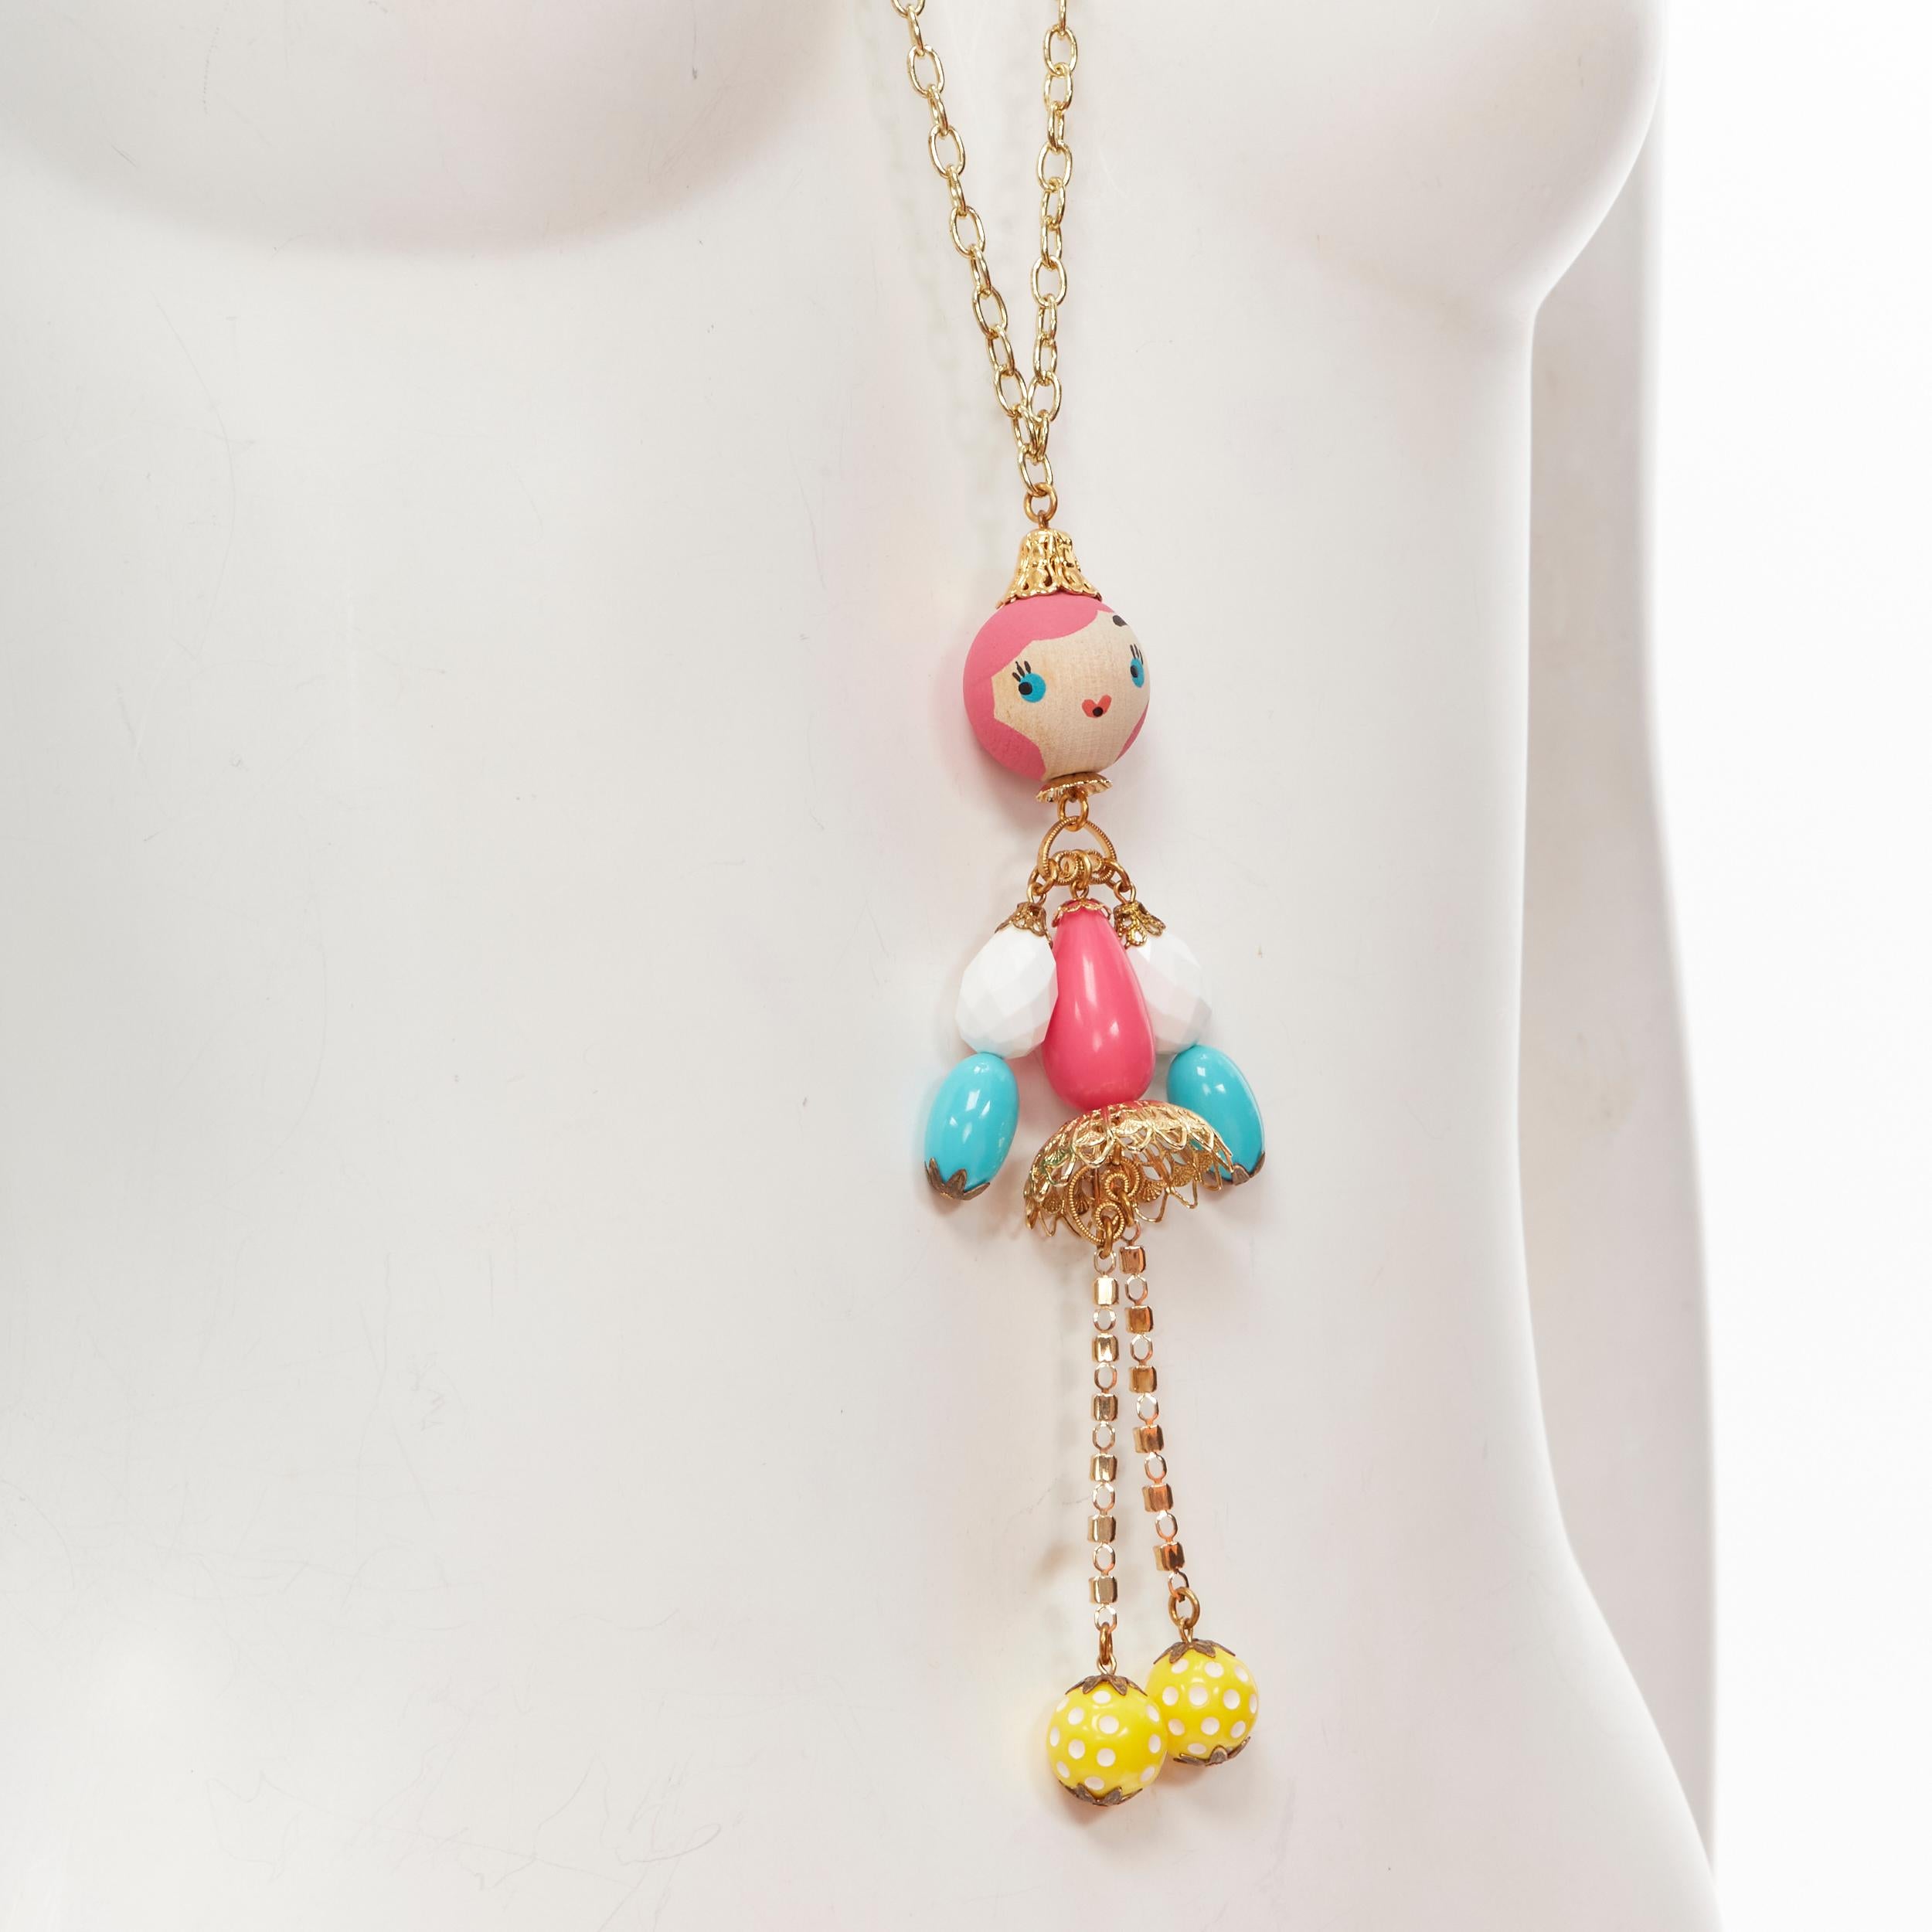 PATCH NYC colourful wood puppet doll charm necklace
Reference: ANWU/A00294
Brand: Patch NYC
Material: Wood, Plastic, Metal
Color: Multicolour
Pattern: Abstract
Closure: Lobster Clasp
Extra Details: Brand logo metal tag.

CONDITION:
Condition: Very